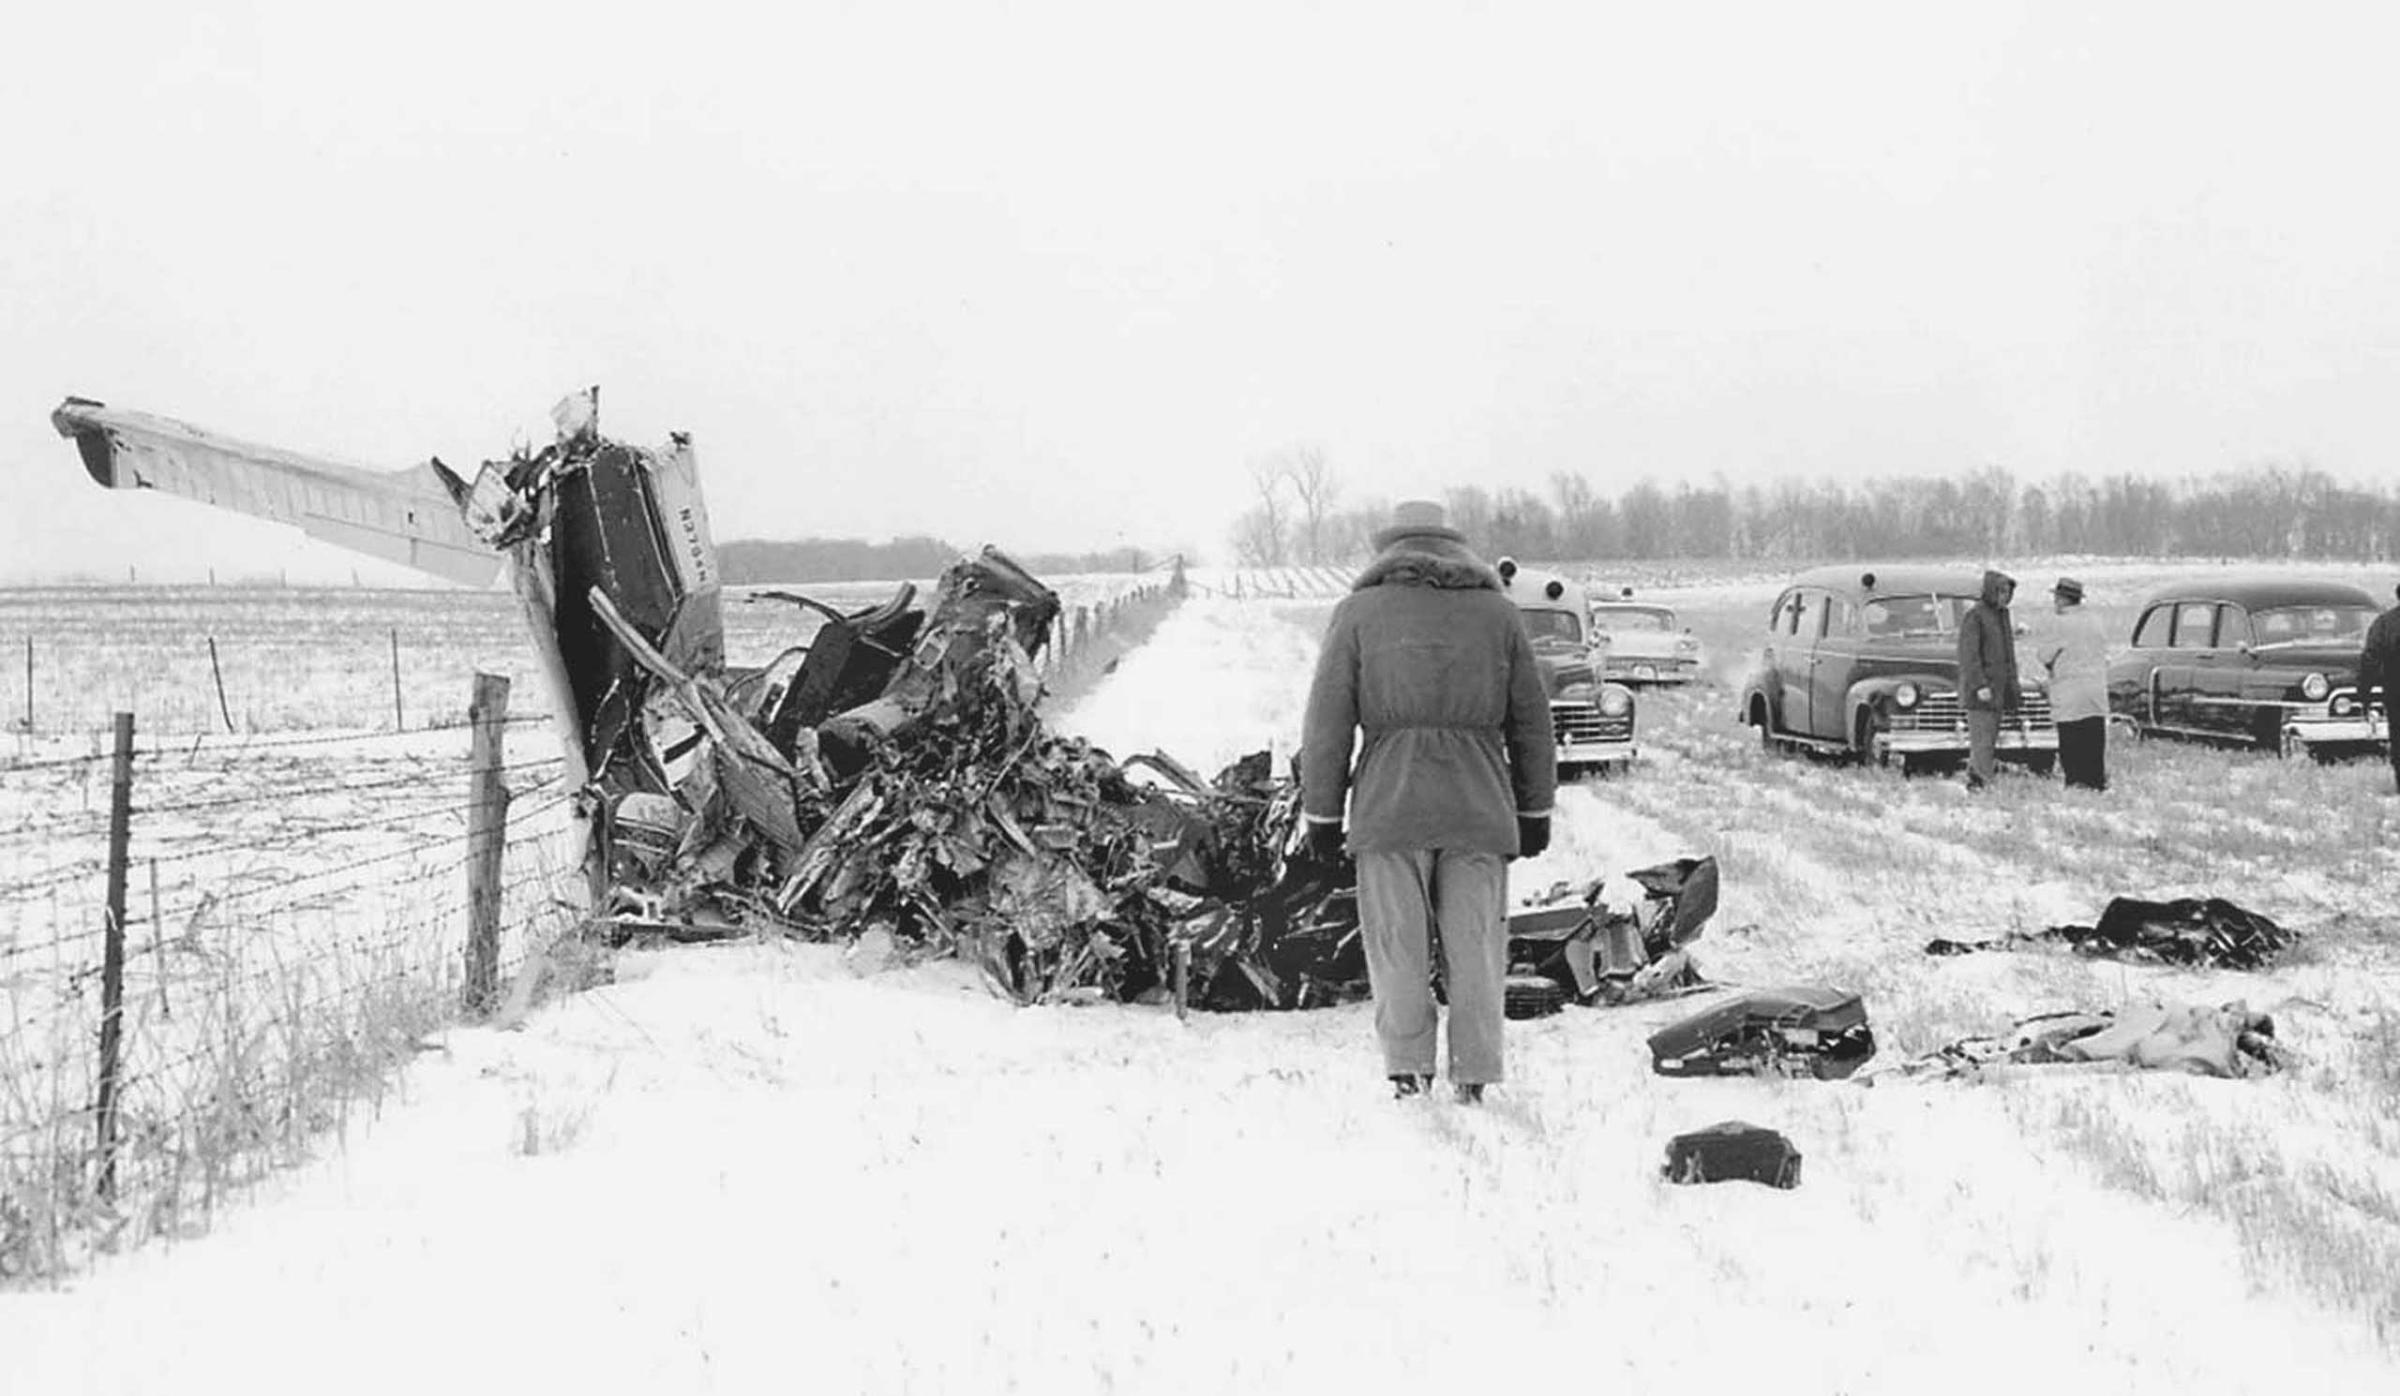 Buddy Holly plane crash site, five miles north of Clear Lake. 1959.